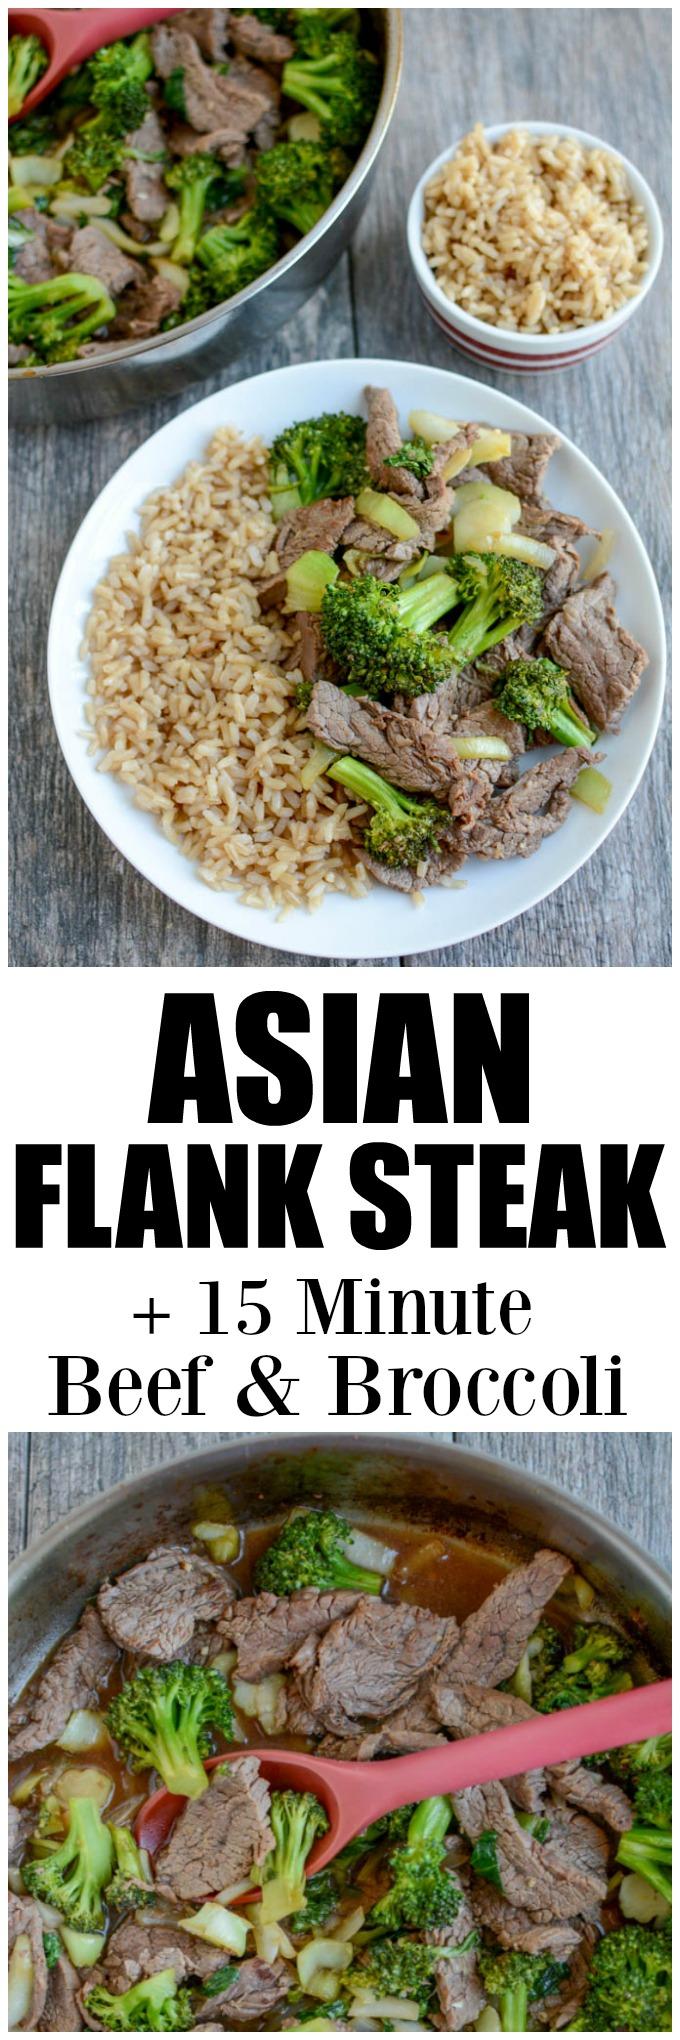 Include this Asian Flank Steak in your next food prep session. Marinate overnight and use it for this 15-minute beef and broccoli dinner or grill it and enjoy the leftovers for lunch.